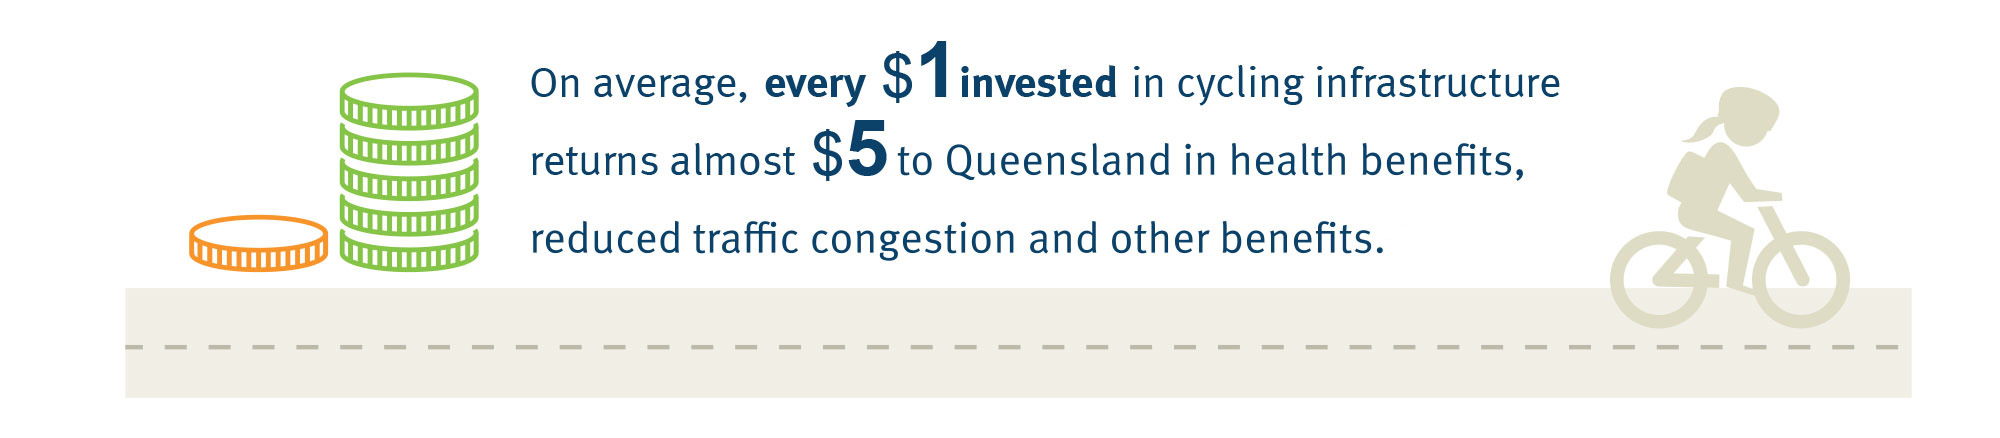 Infographic stating 'On average, every $1 invested in cycling infrastructure returns almost $5 to Queensland in health benefits, reduced traffic congestion and other benefits'